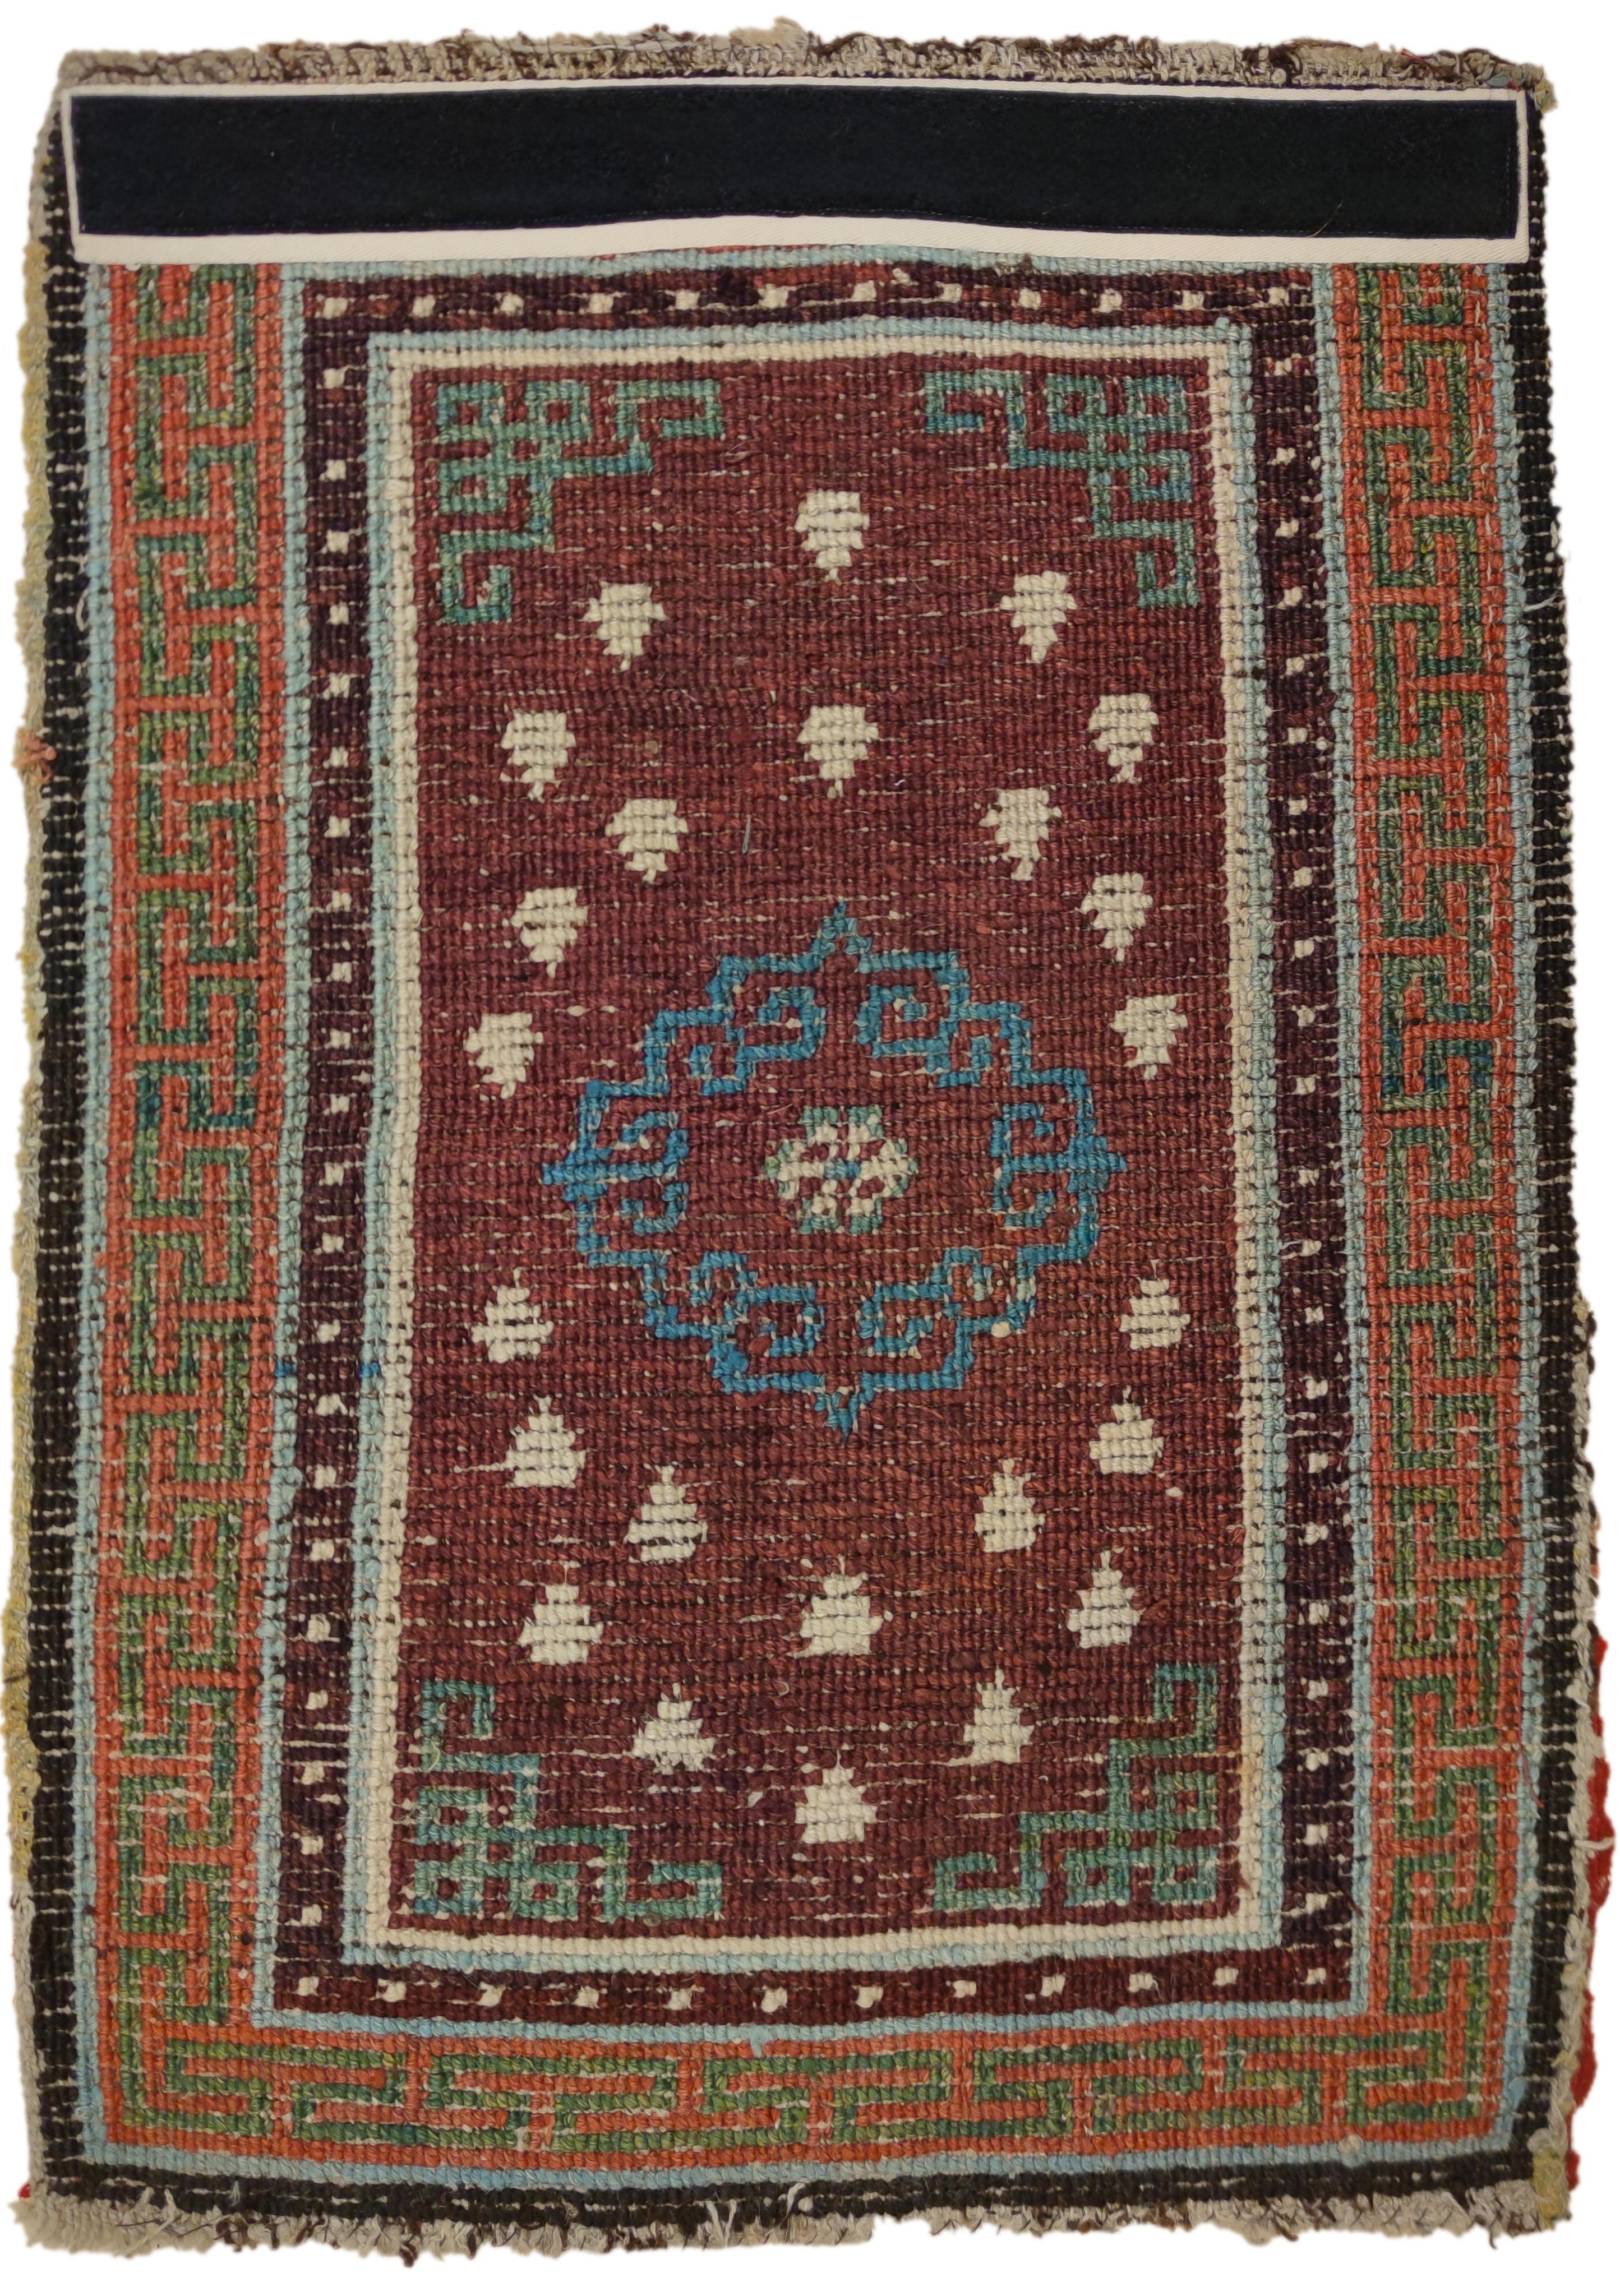 Tibetan rugs woven with thick squarish knots in brilliant colours are considered among the earliest, and are often referred to in Tibet as Gyantse. Here we see a centralised light blue archaic mandala set against an aubergine purple background